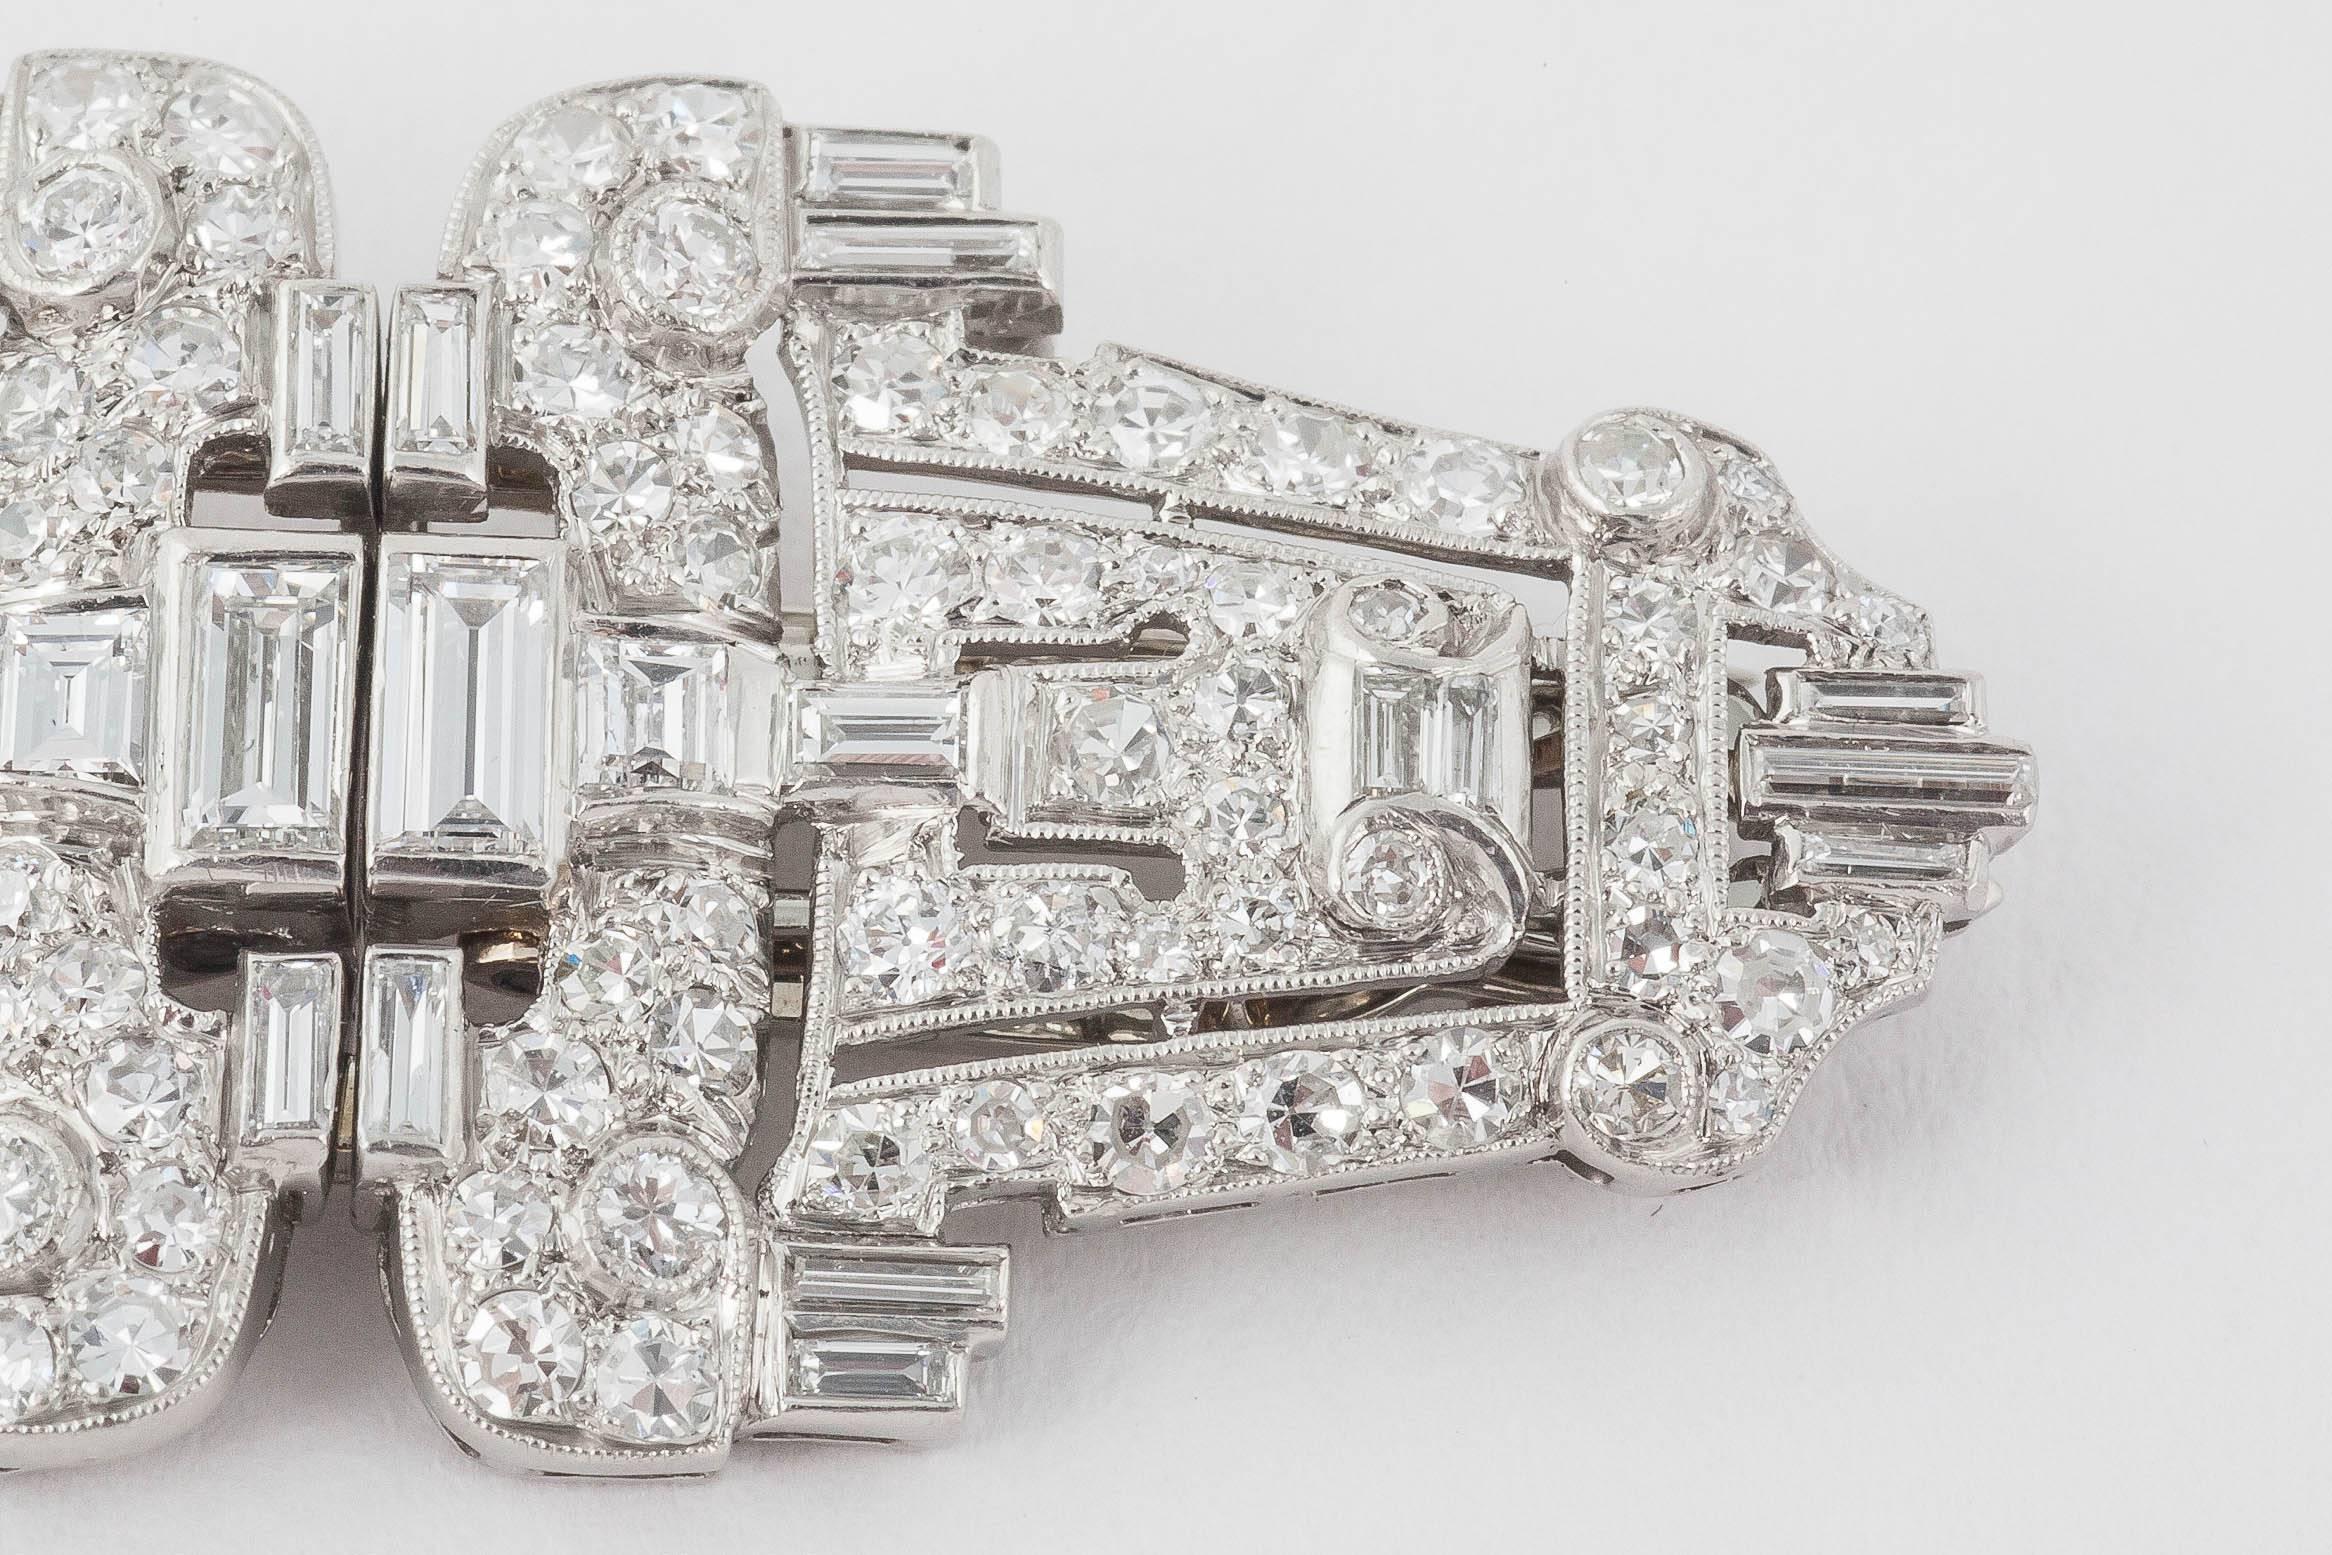 A pair of Diamond double clips with fitting to covert to brooch, The diamonds are of mixed cuts and set in Platinum